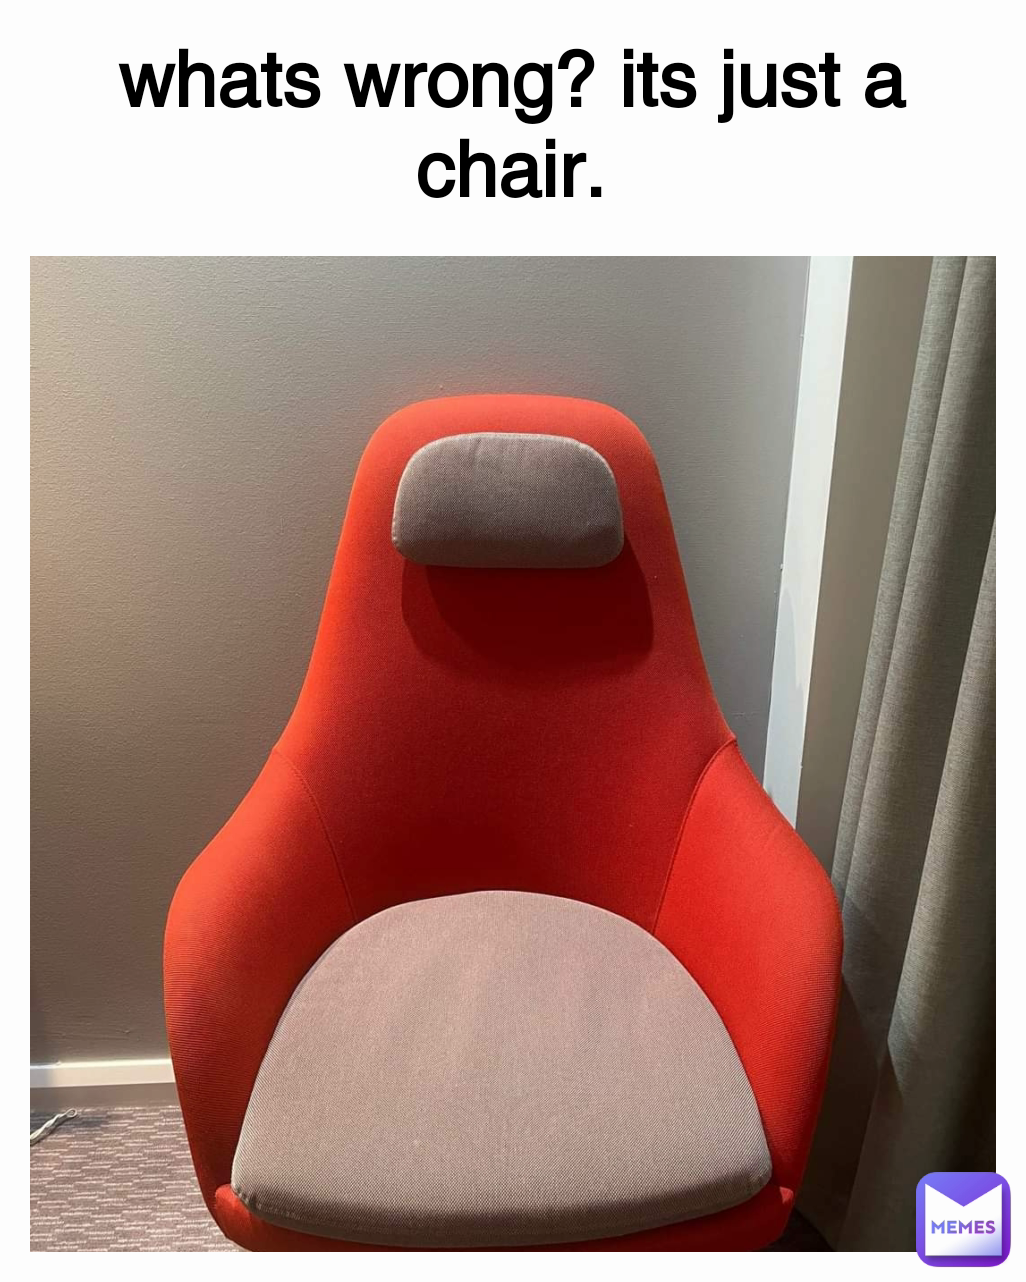 whats wrong? its just a chair.